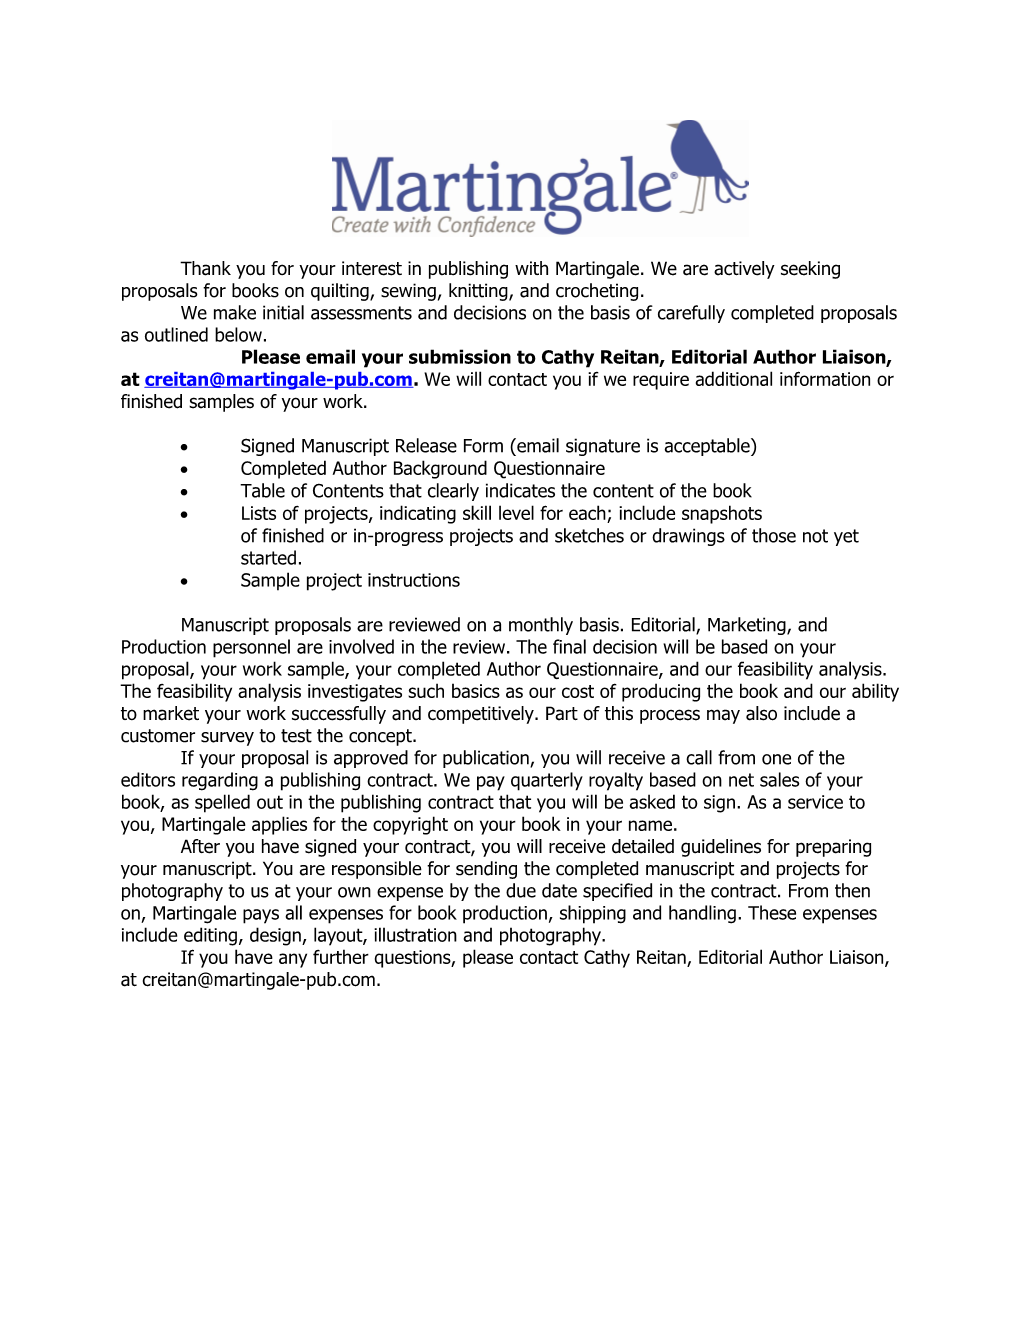 Thank You for Your Interest in Martingale & Company